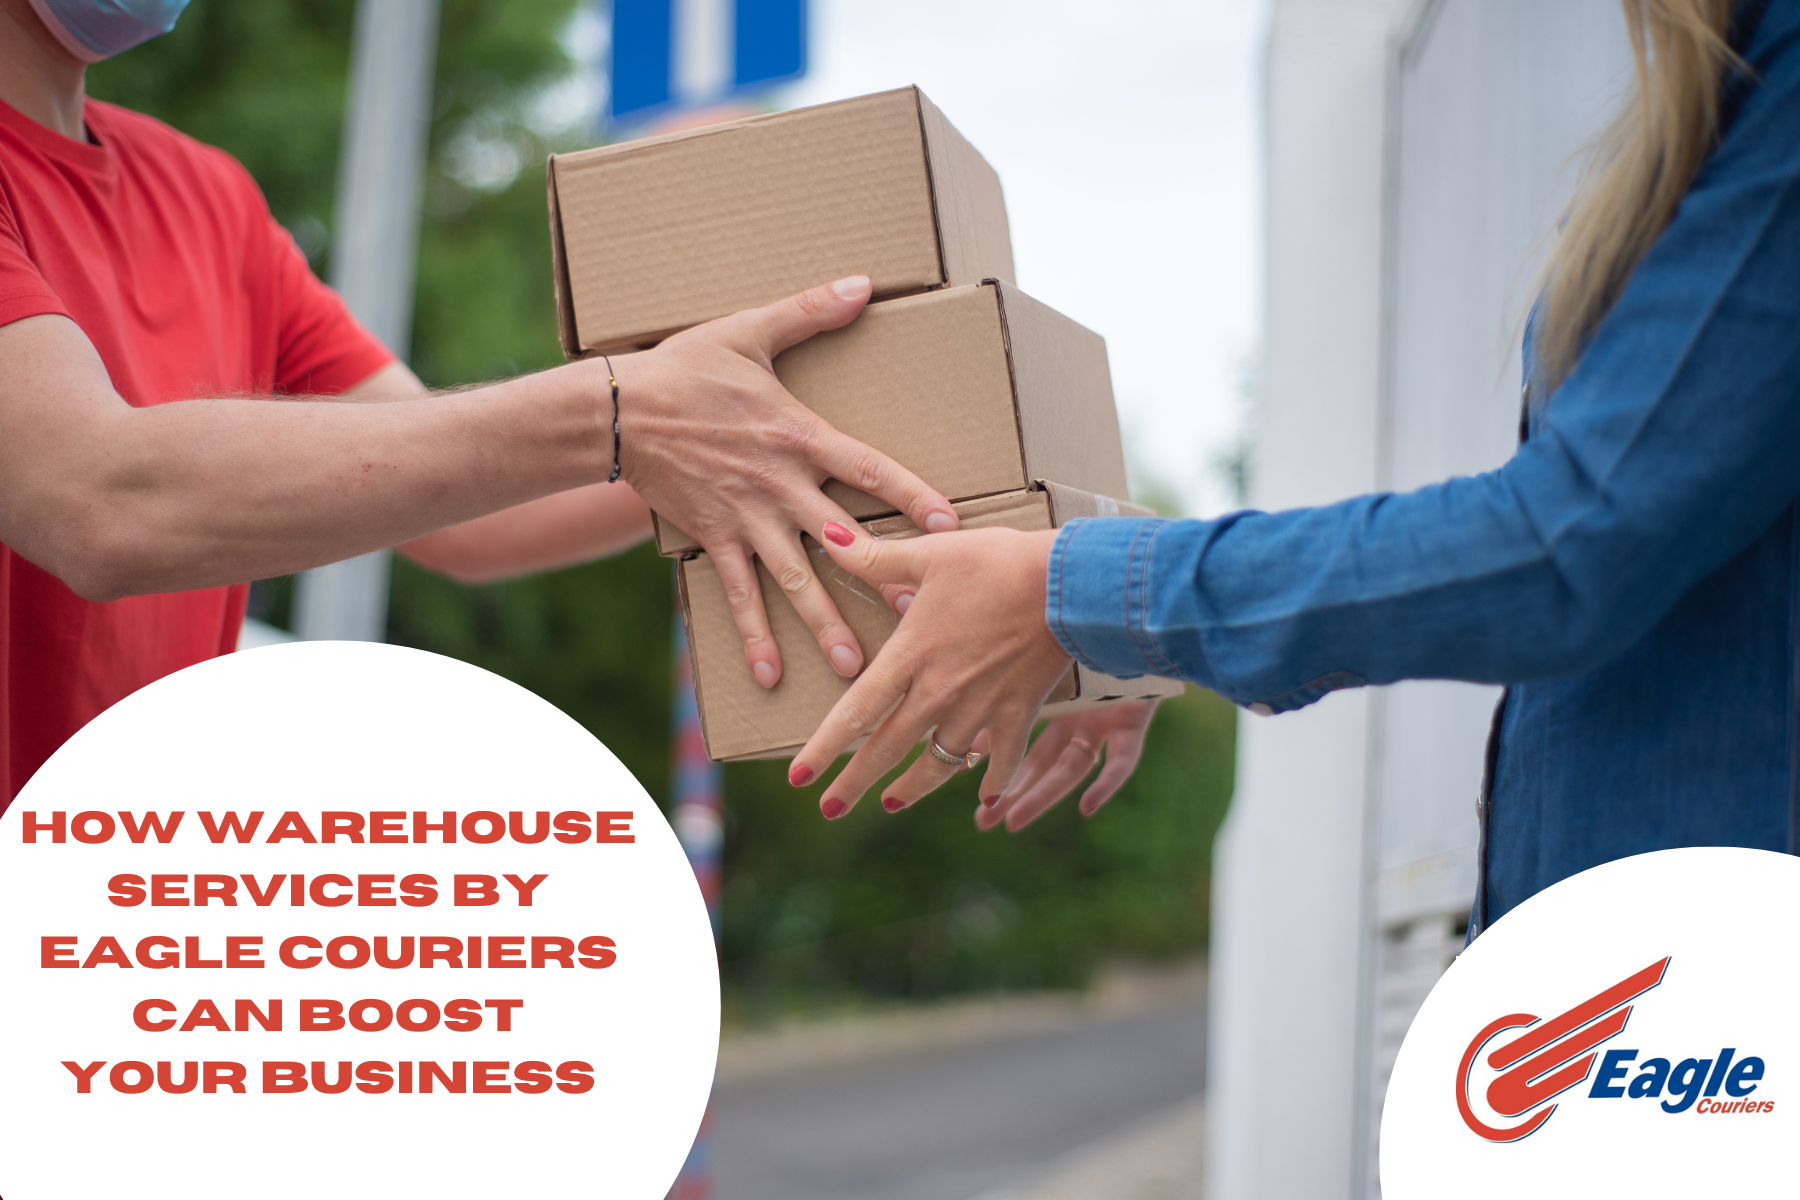 Streamlining your supply chain: How warehouse services by Eagle Couriers can boost your business